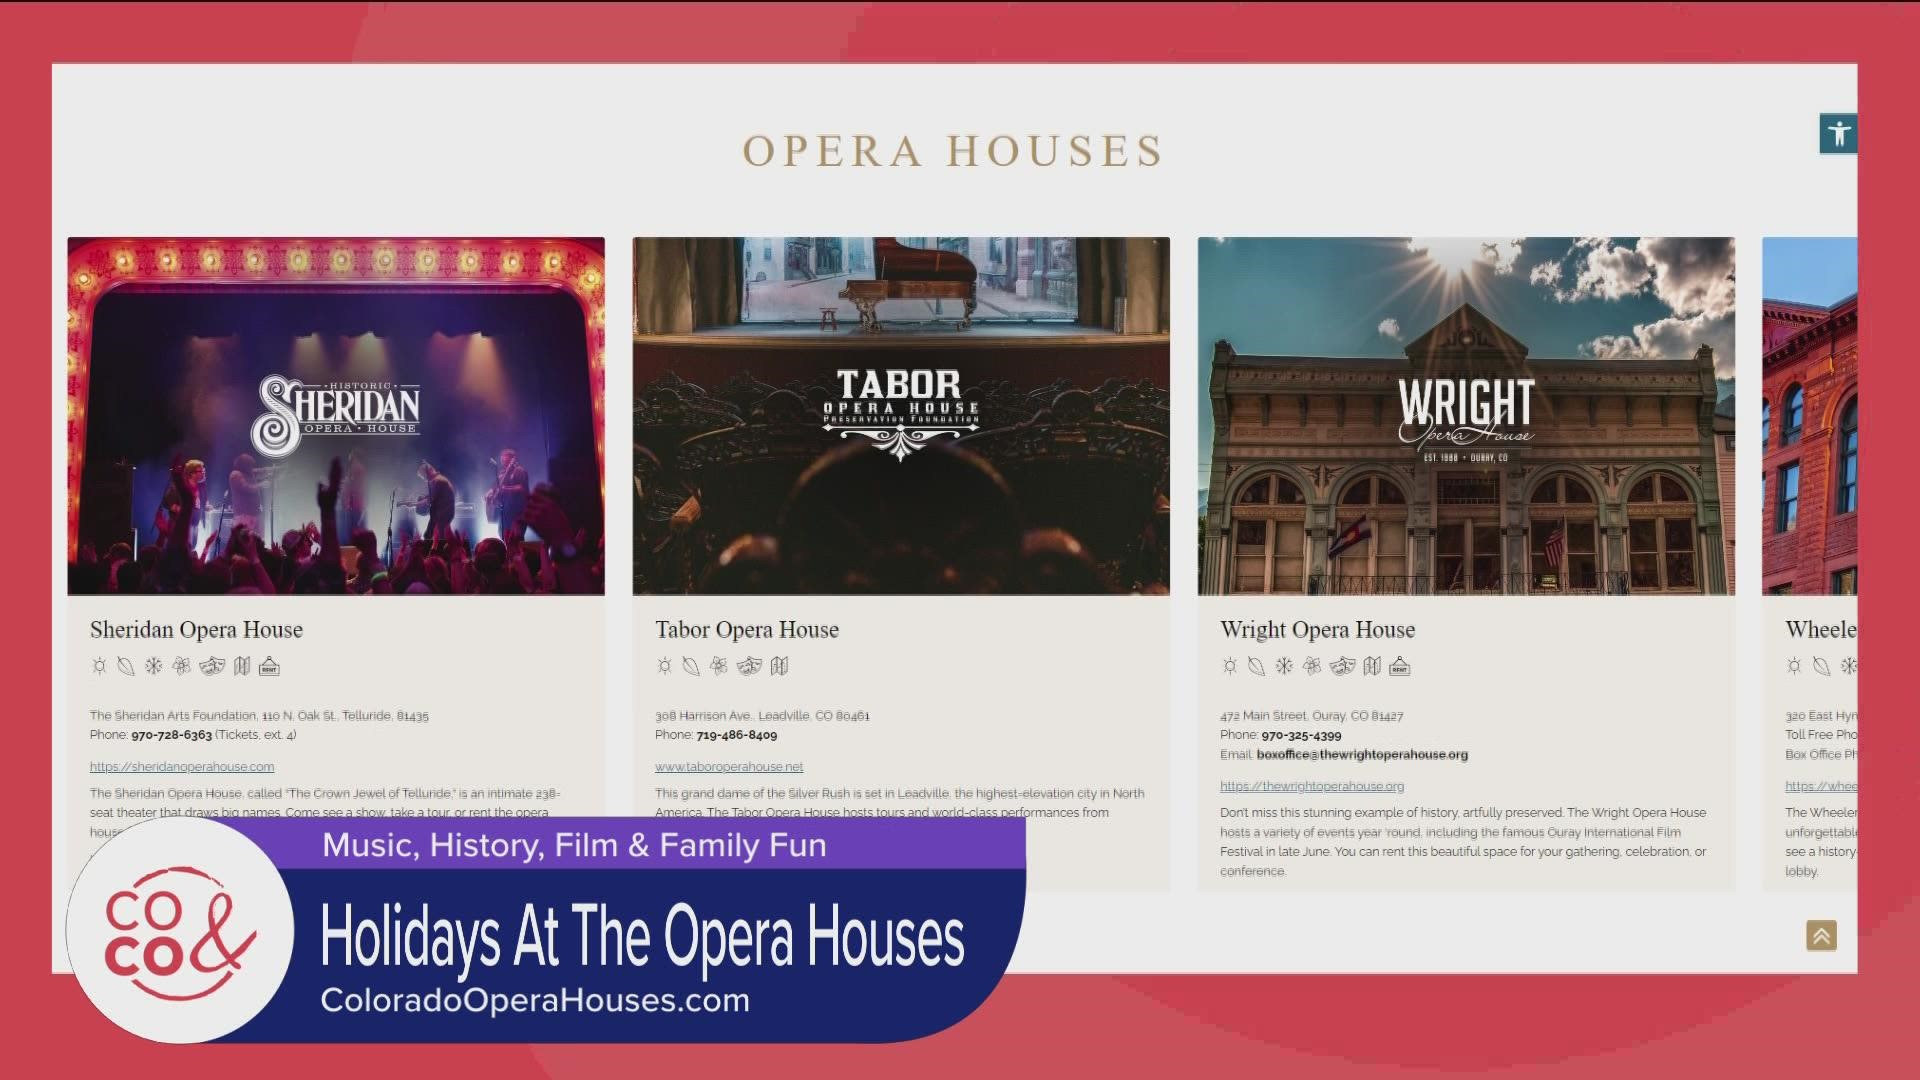 Do something different this holiday season! Learn more about Colorado's Opera scene at ColoradoOperaHouses.com.